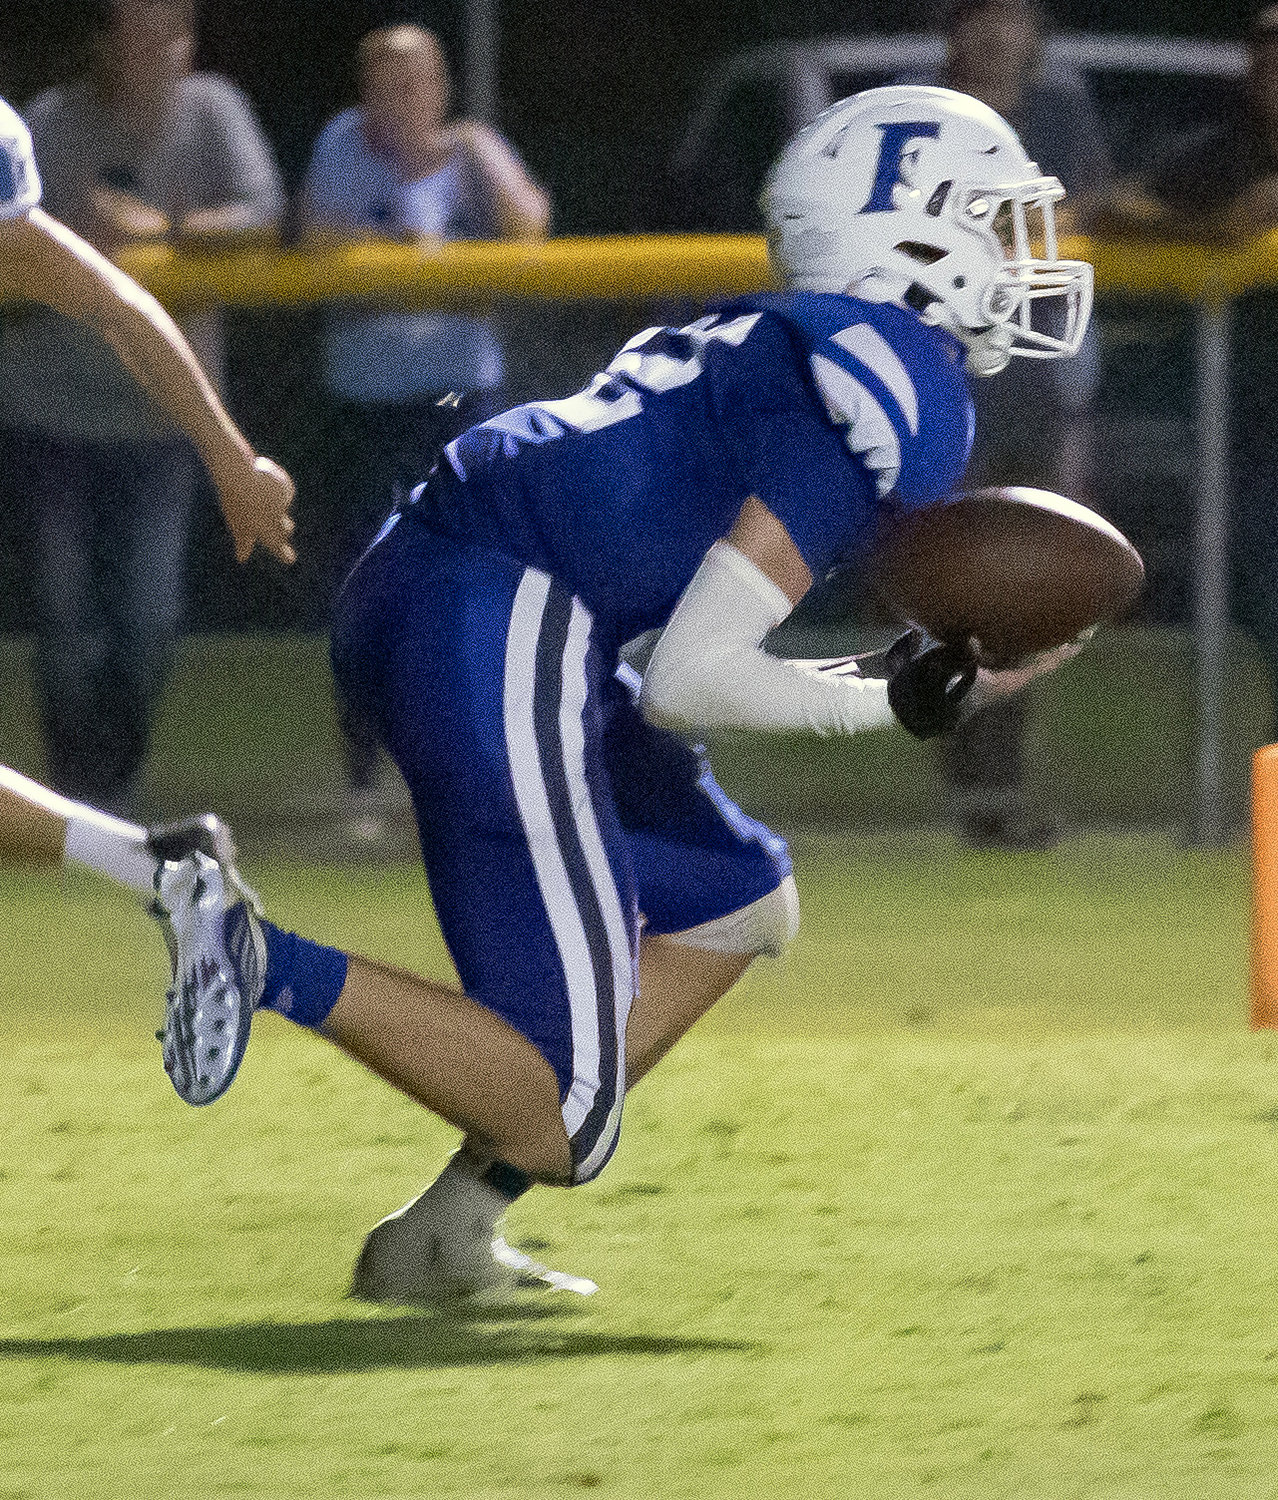 Eli Bell hauls in the 21-yard touchdown catch for the Rockets,